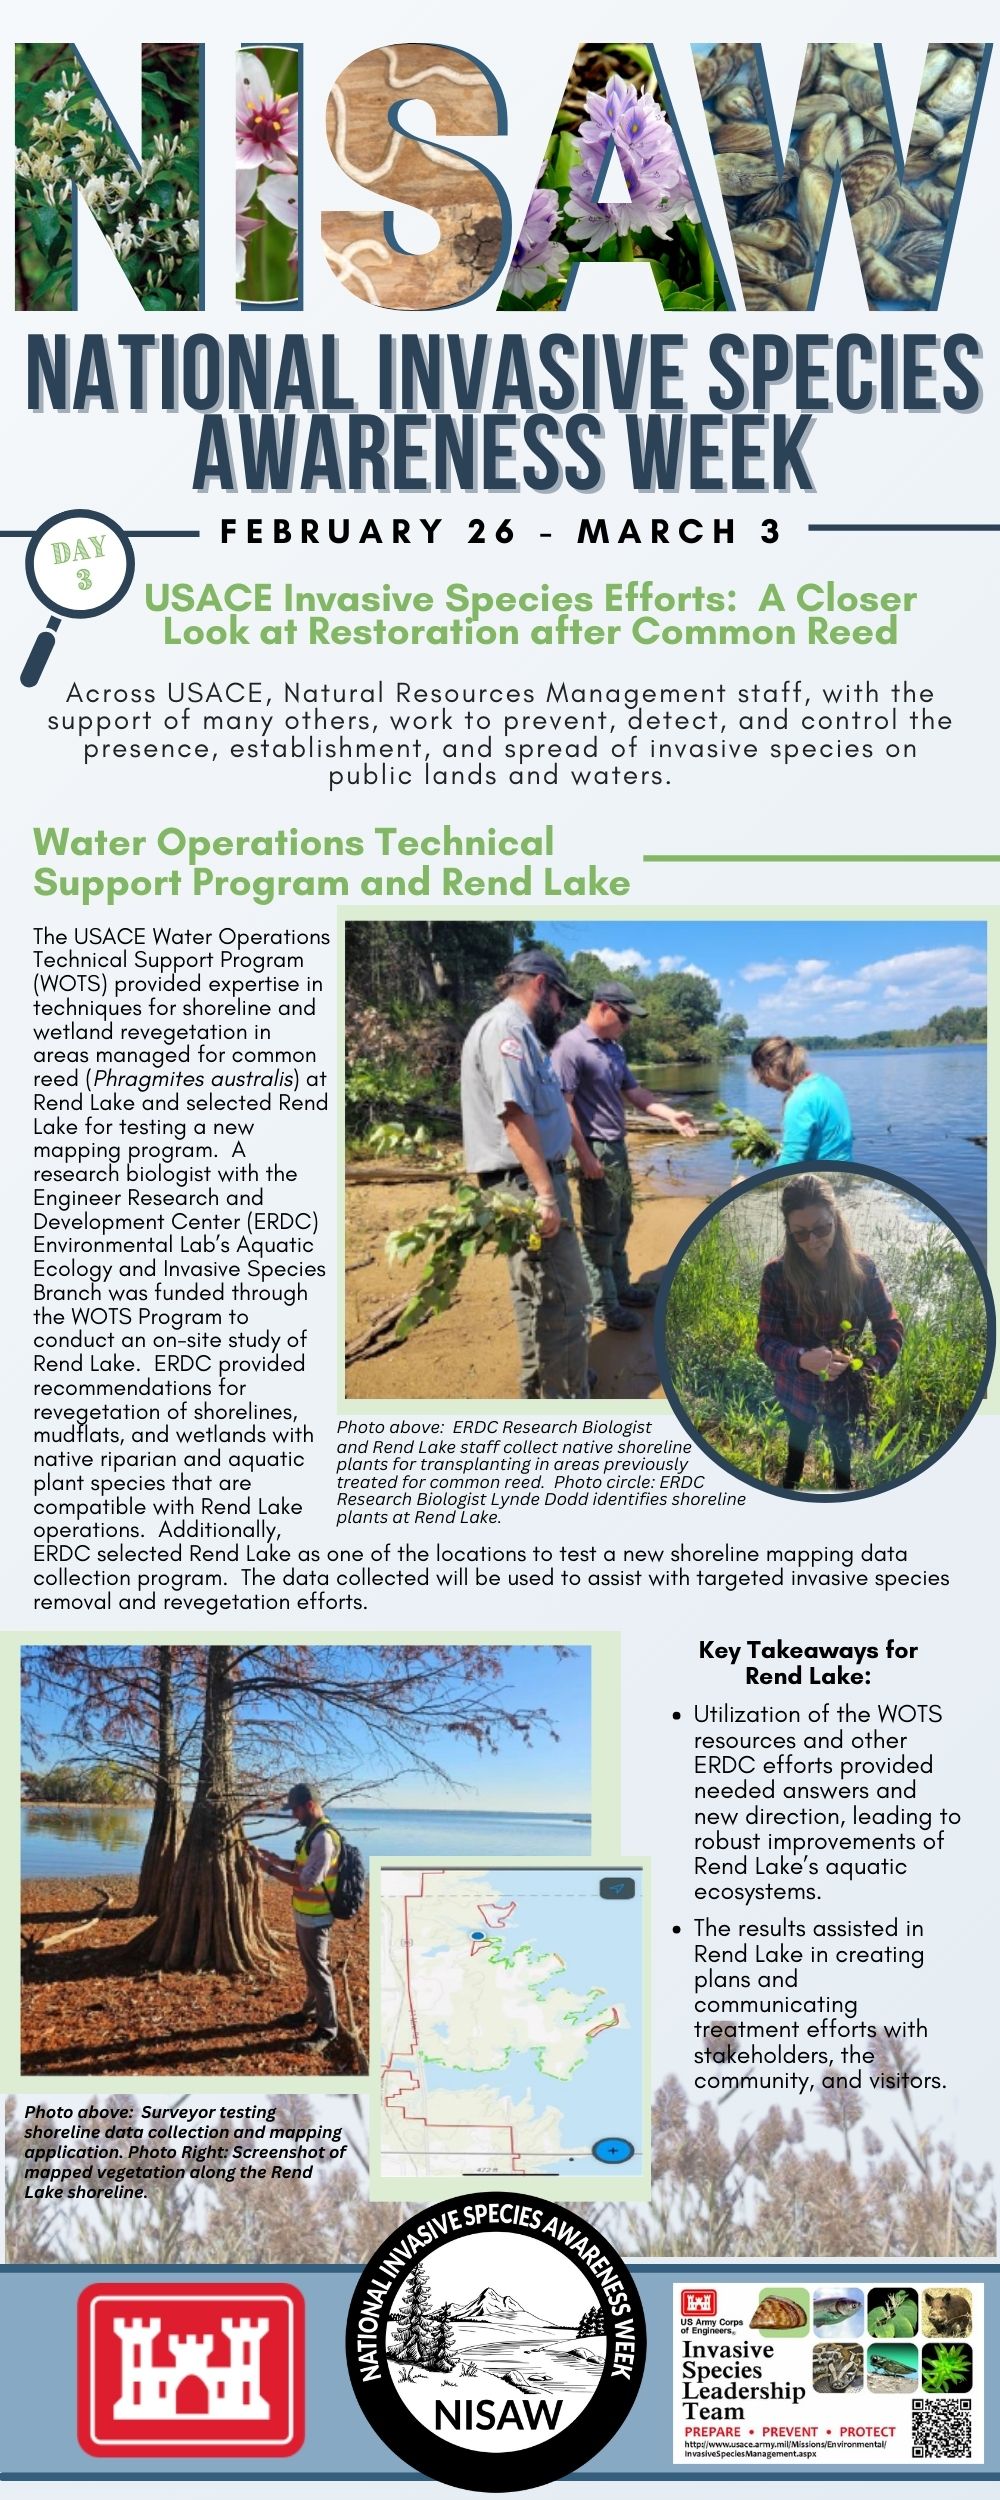 Bookmark for Day 3 of National Invasive Species Awareness Week, highlighting the USACE invasive species efforts related to aquatic plants